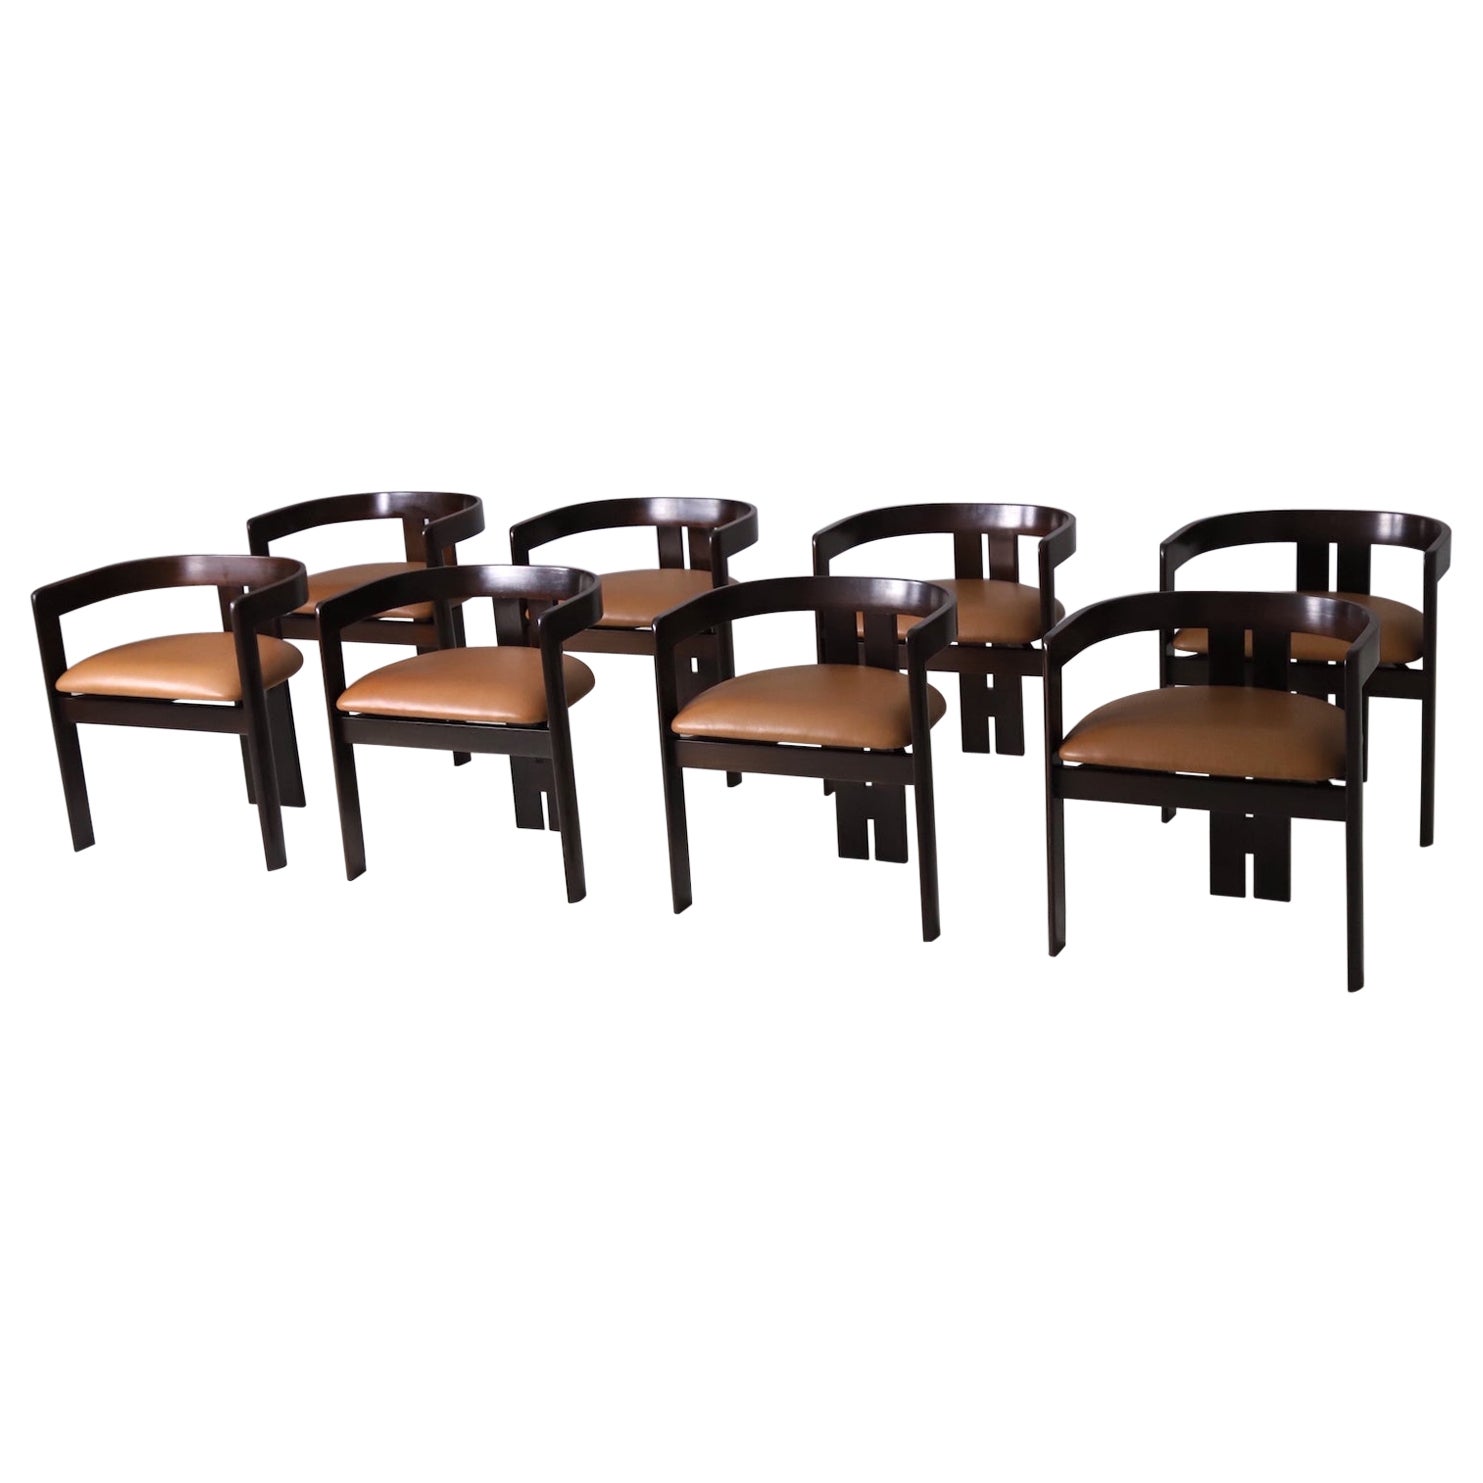 Set of 8 'Pigreco' dining chairs by Tobia Scarpa for Gavina, Italy 1960s